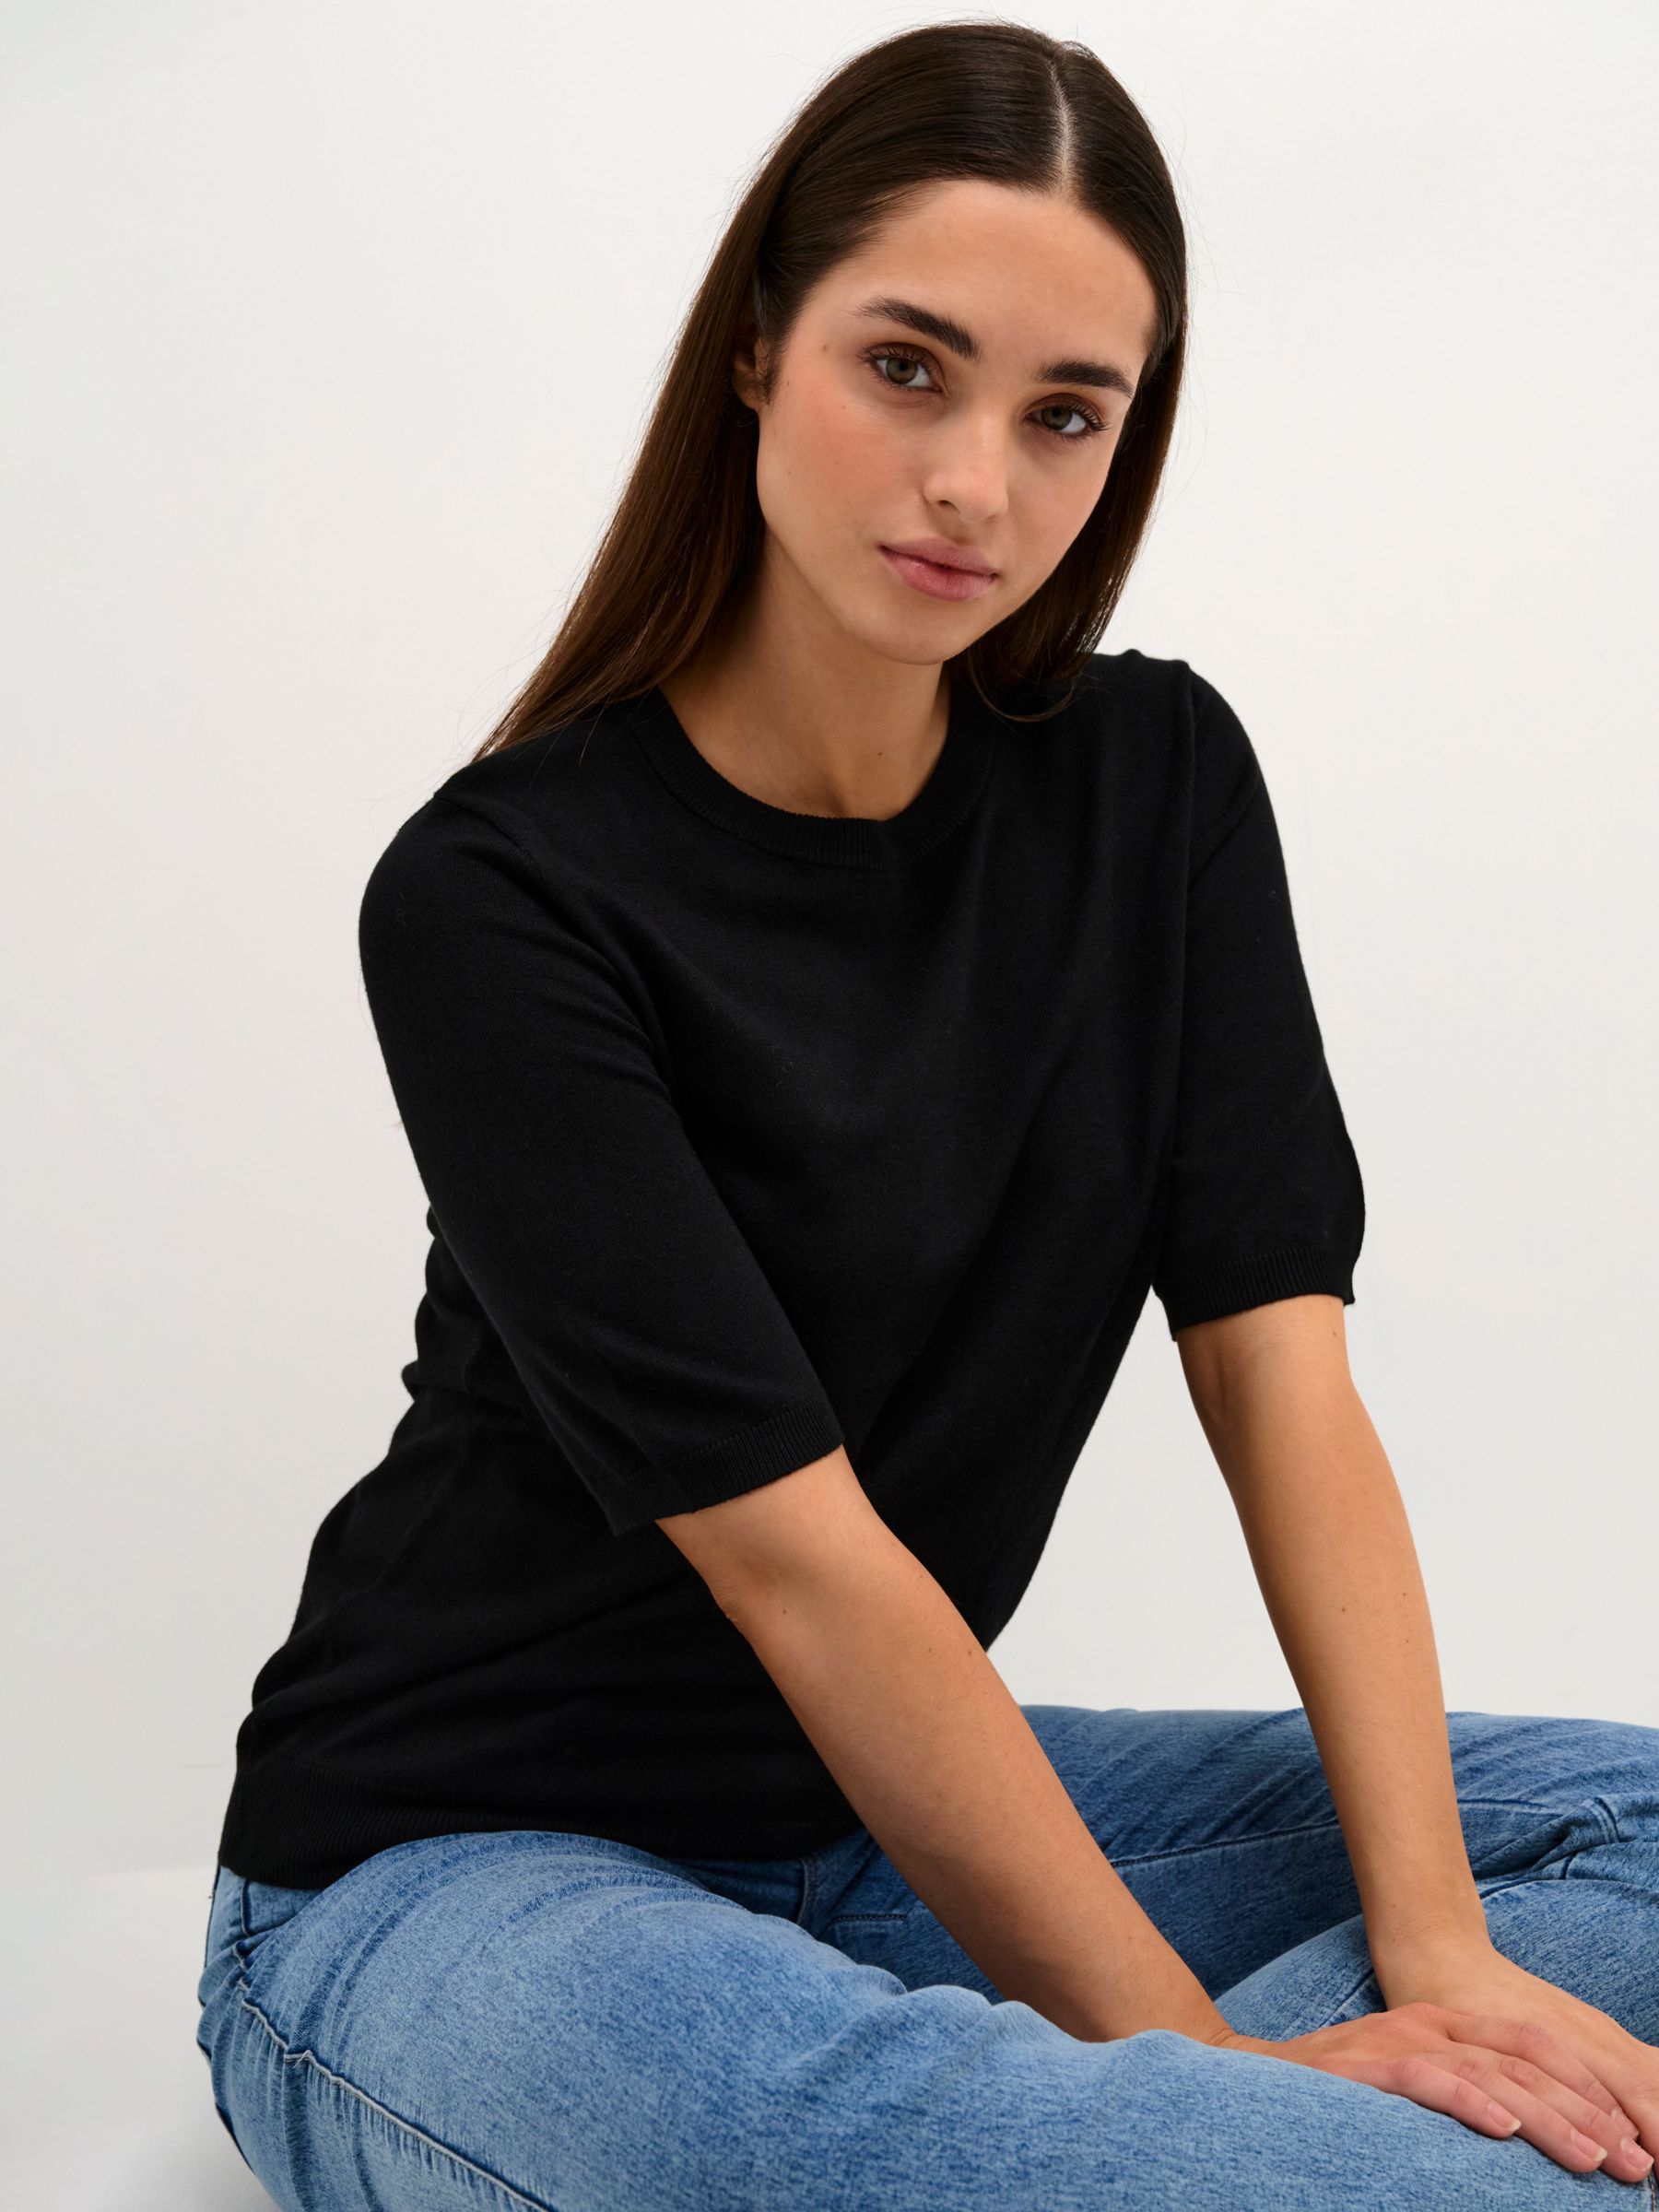 Buy KAFFE Lizza Short Sleeve Knitted Top Online at johnlewis.com